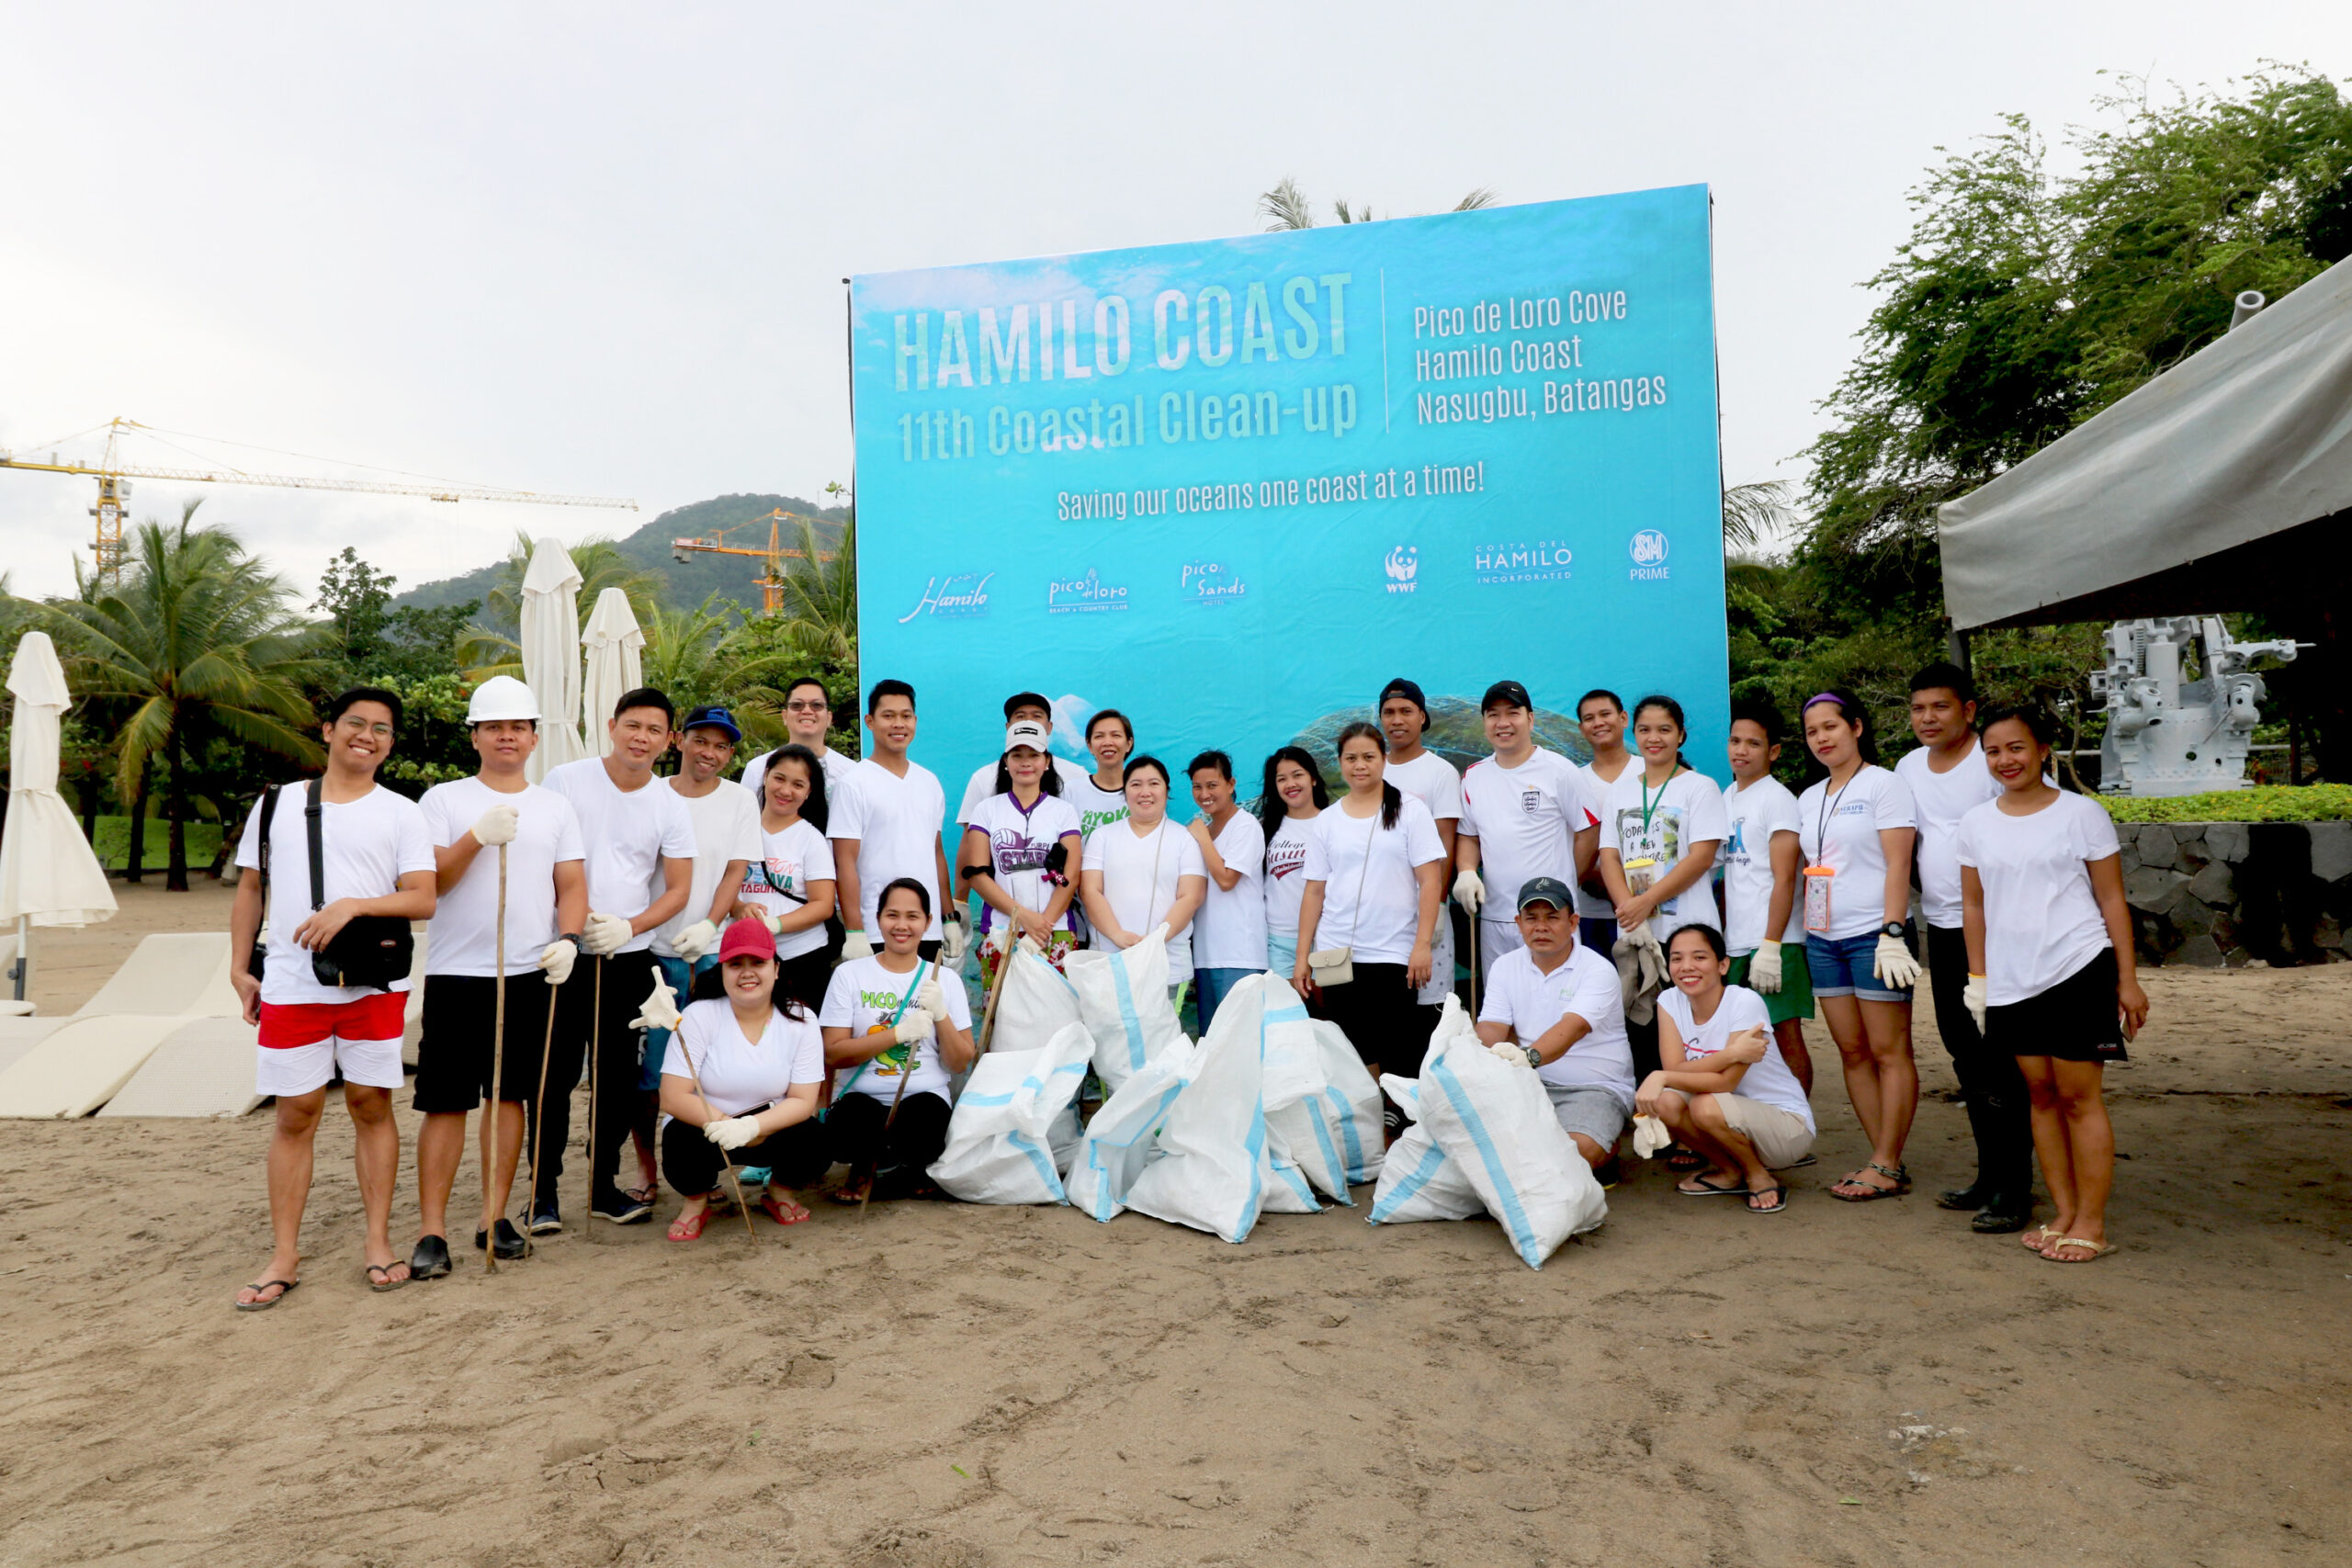 Hamilo Coast and WWF further push for environmental awareness by celebrating occasions that show respect for biodiversity such as the Coastal Clean Up.